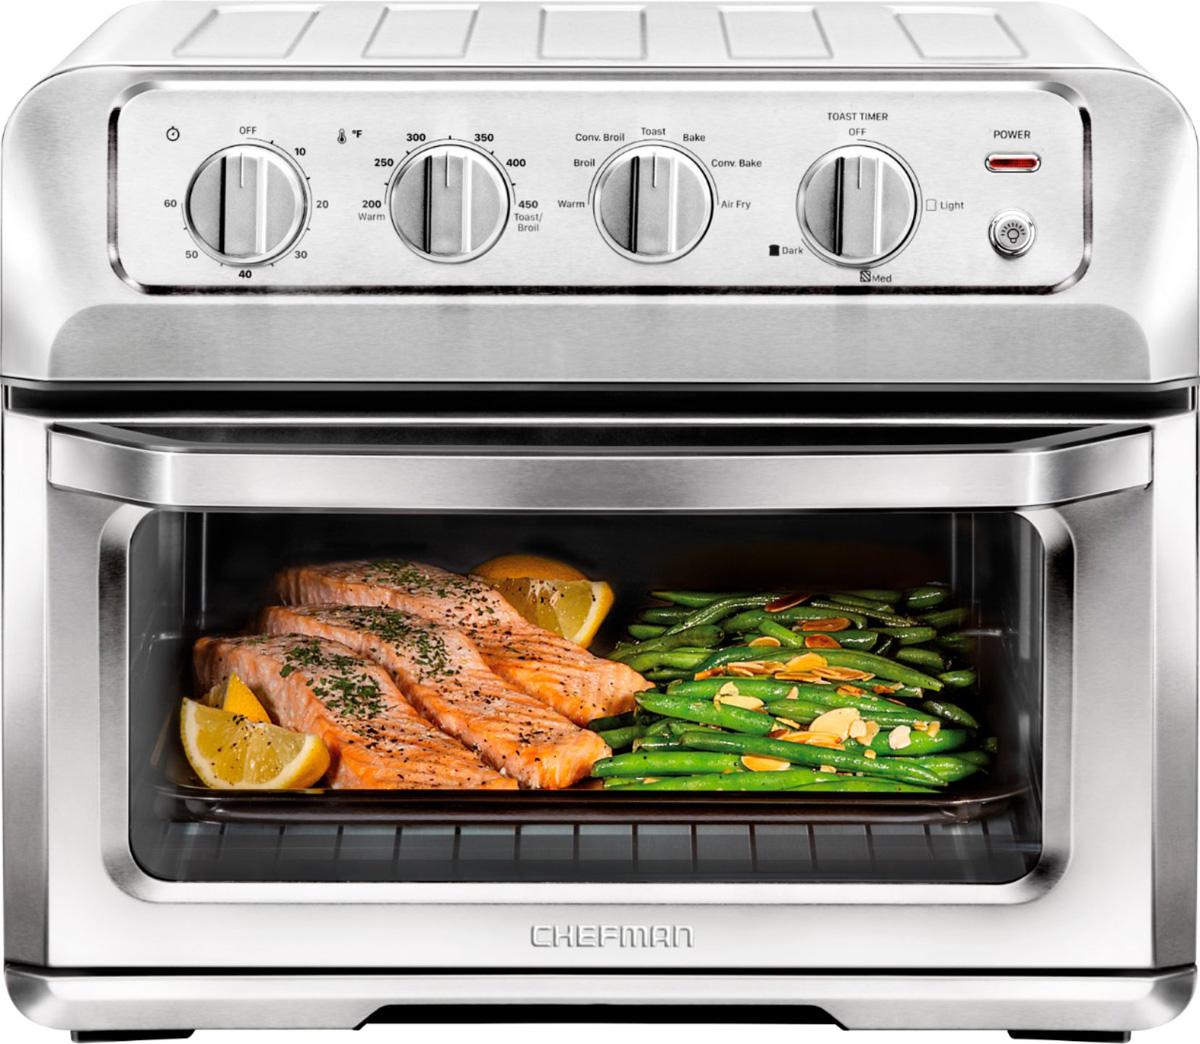 Chefman Toast-Air 6-Slice Convection Toaster Oven + Air Fryer for $89.99 Shipped